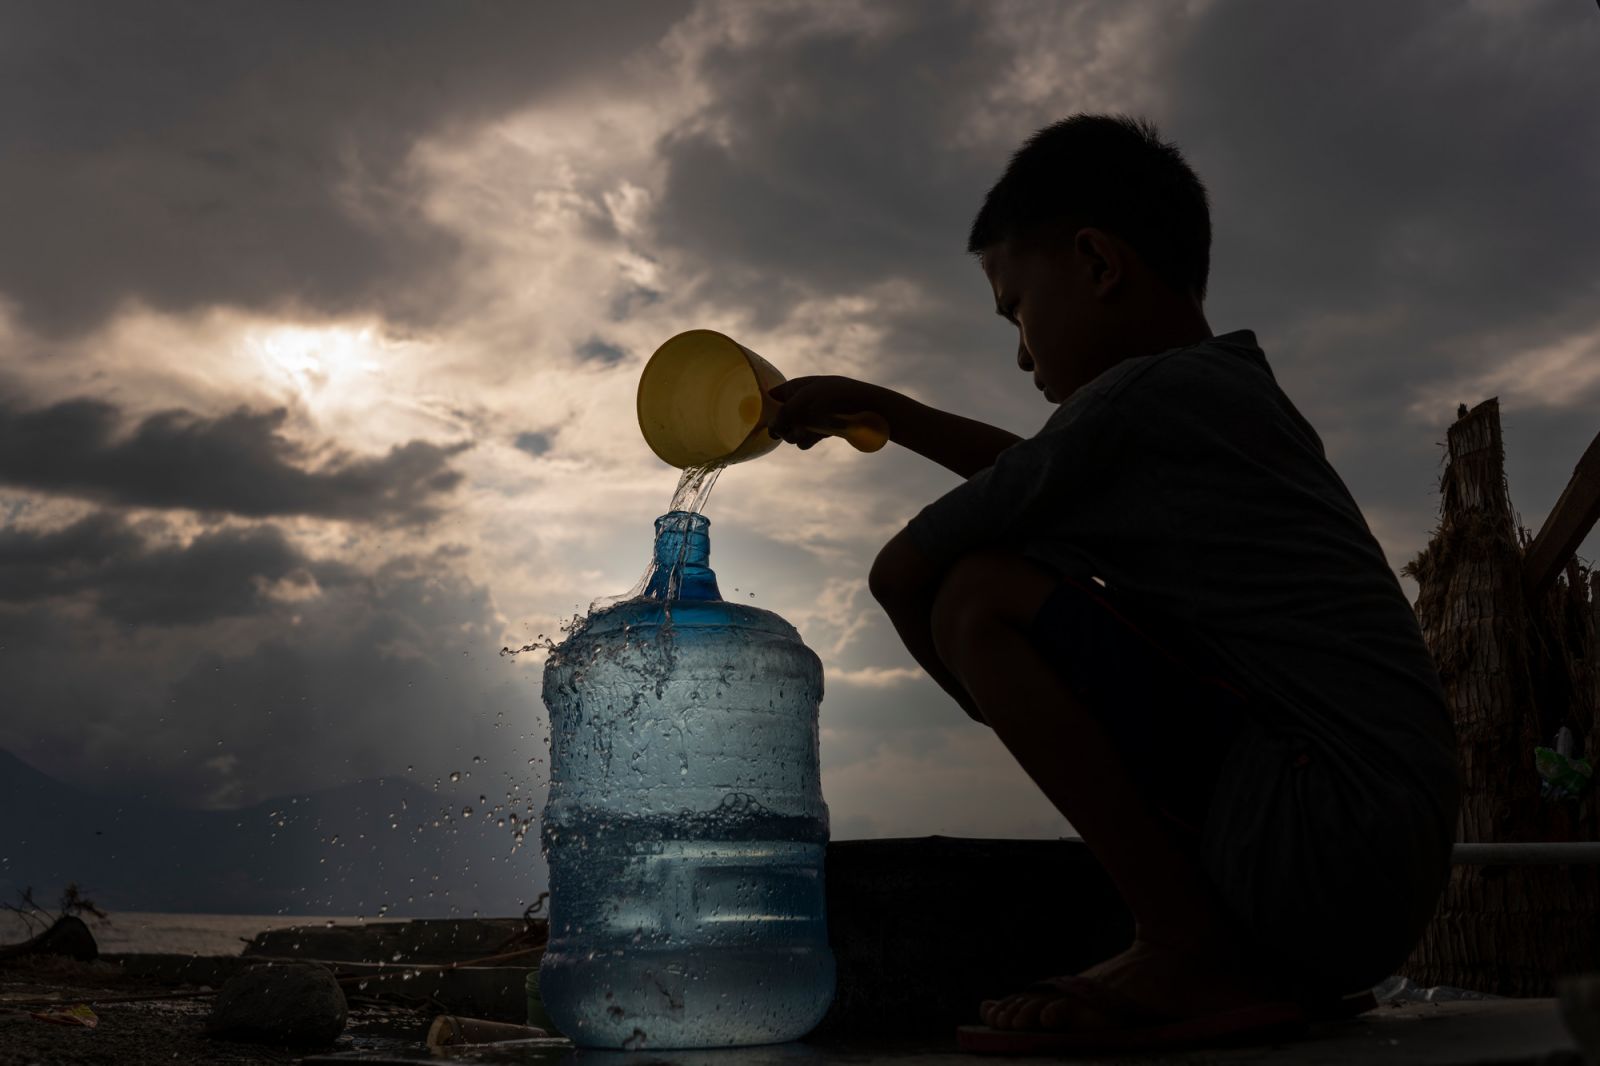 A boy collects water near a temporary shelter for survivors of the earthquake and tsunami. Donggala, Central Sulawesi, Indonesia. October 15, 2018. Credit: Fauzan Ijazah/CARE.